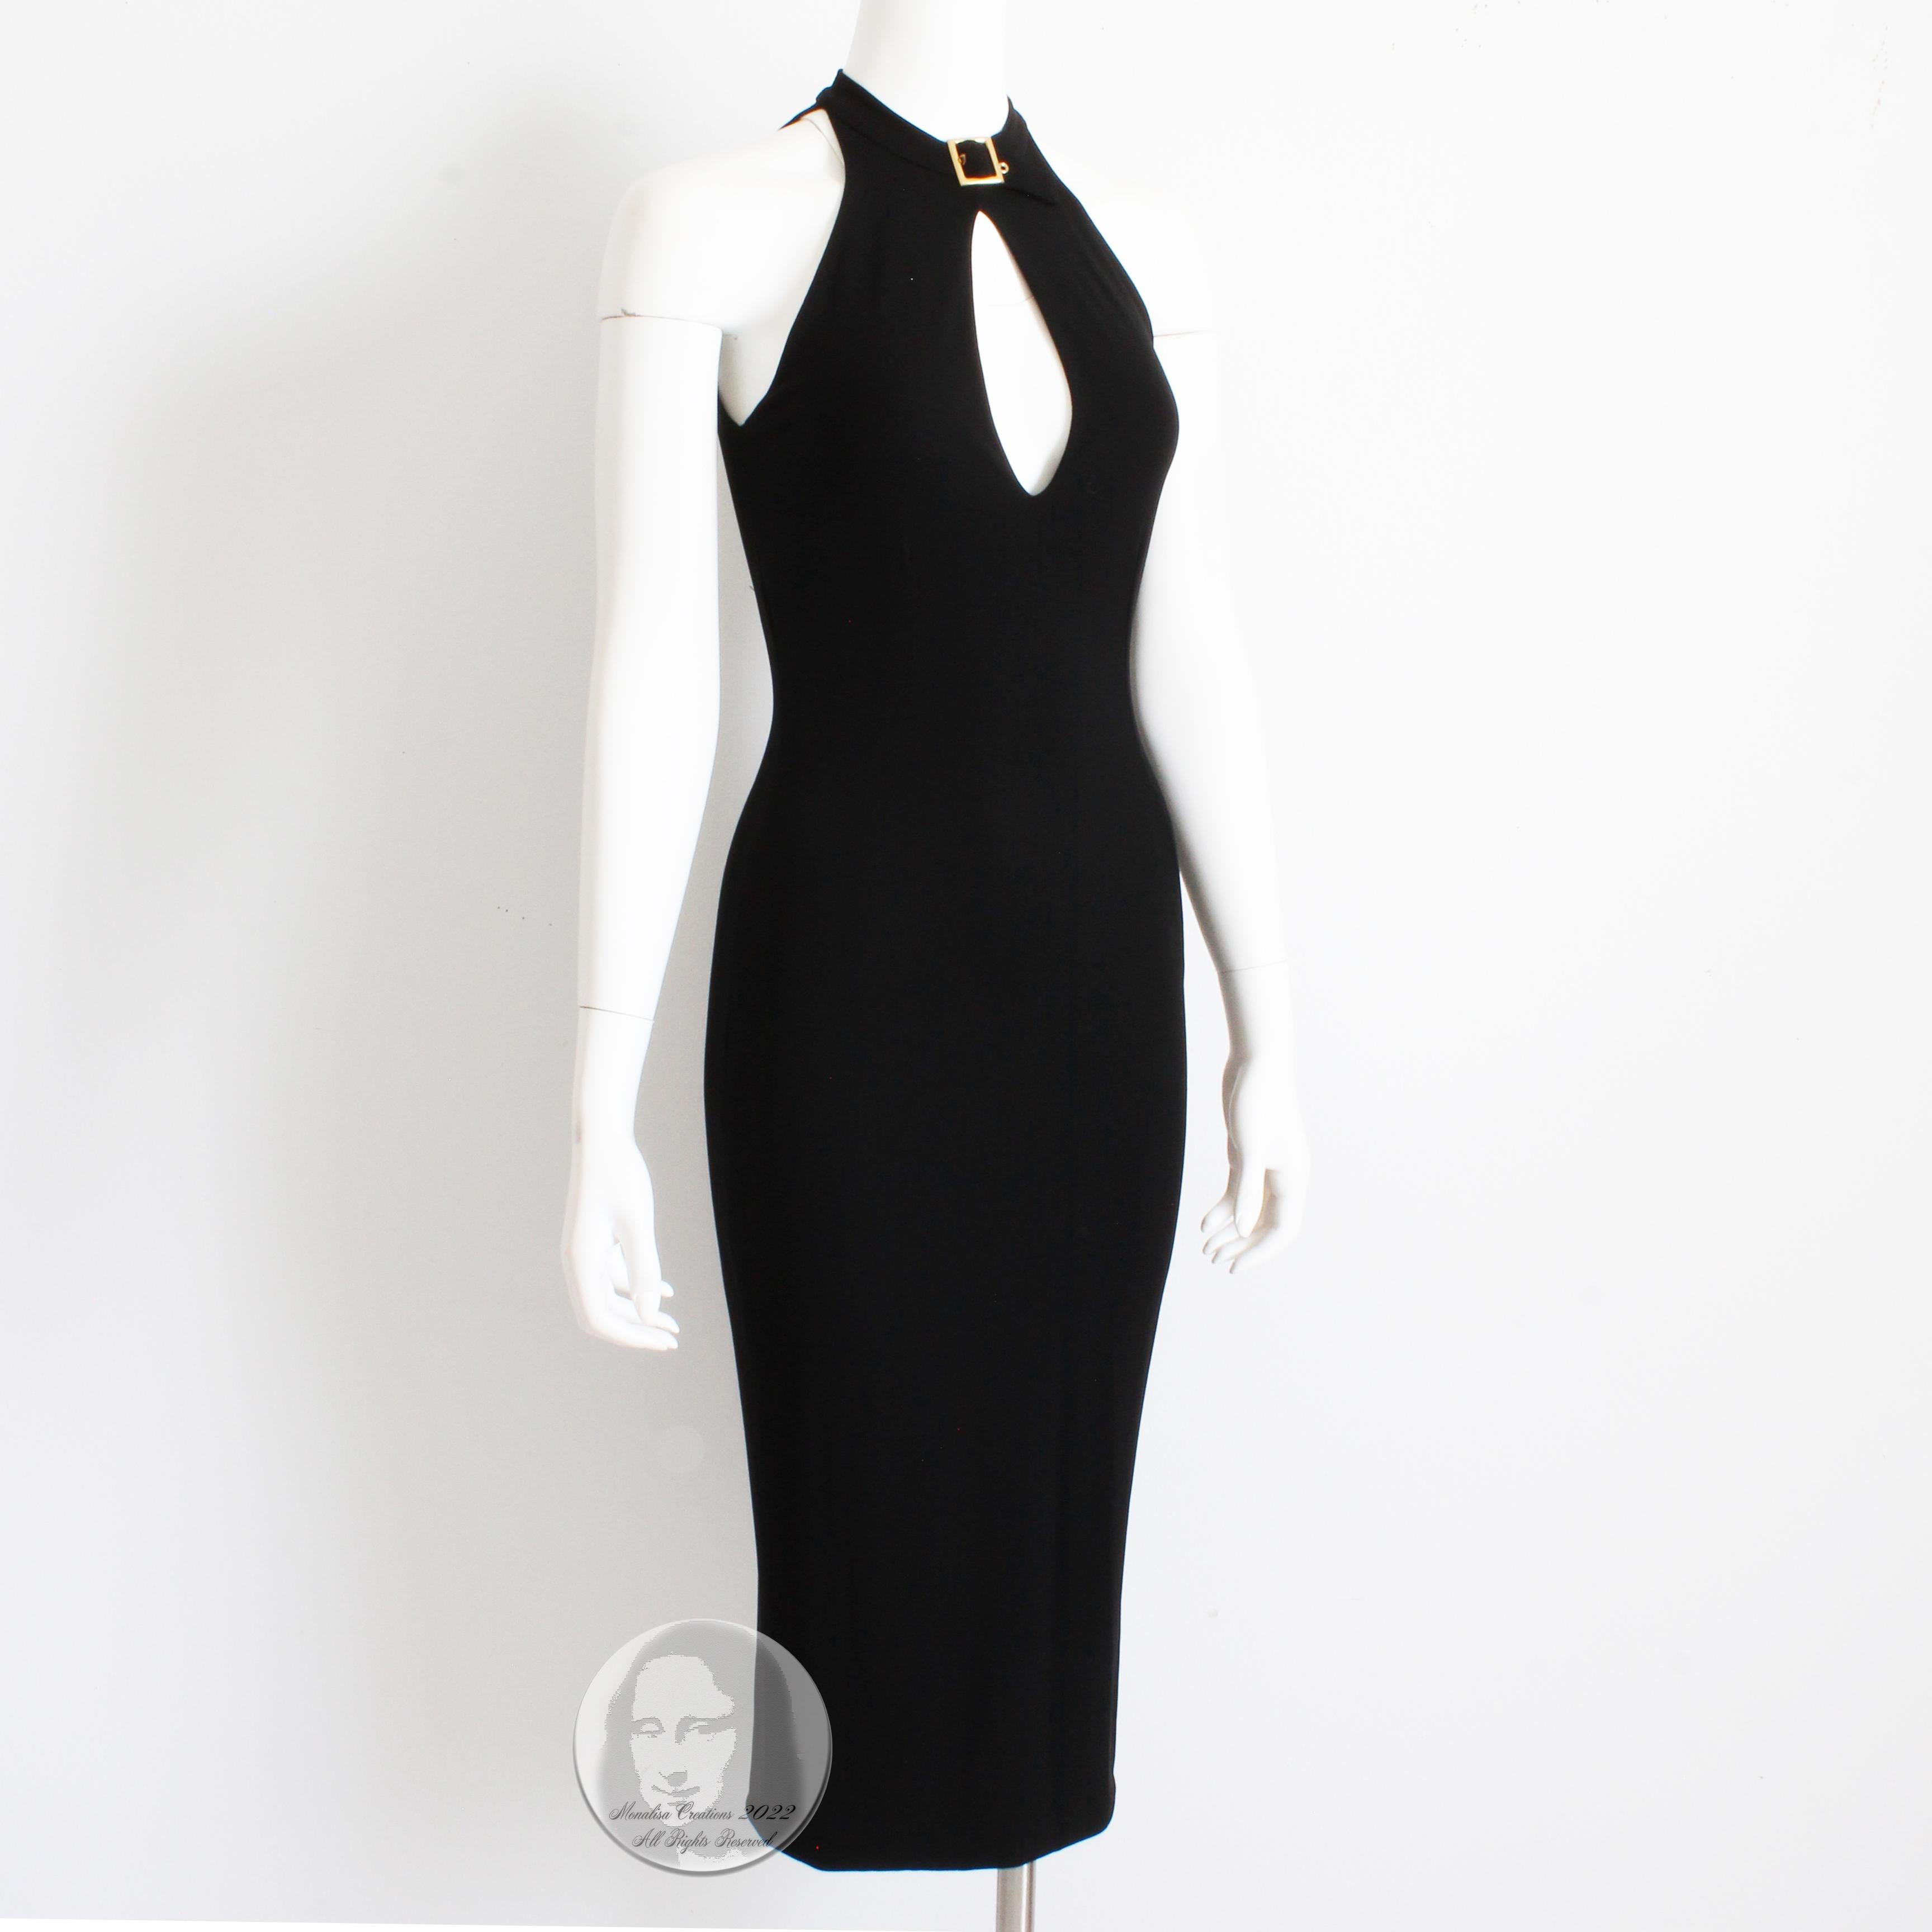 This chic black jersey dress was made by Dolce & Gabbana, most likely in the mid 1990s. Made from what we suspect is a viscose/elastane blend (no content label), the cut and construction on this dress is so sexy and sophisticated! It features a gold